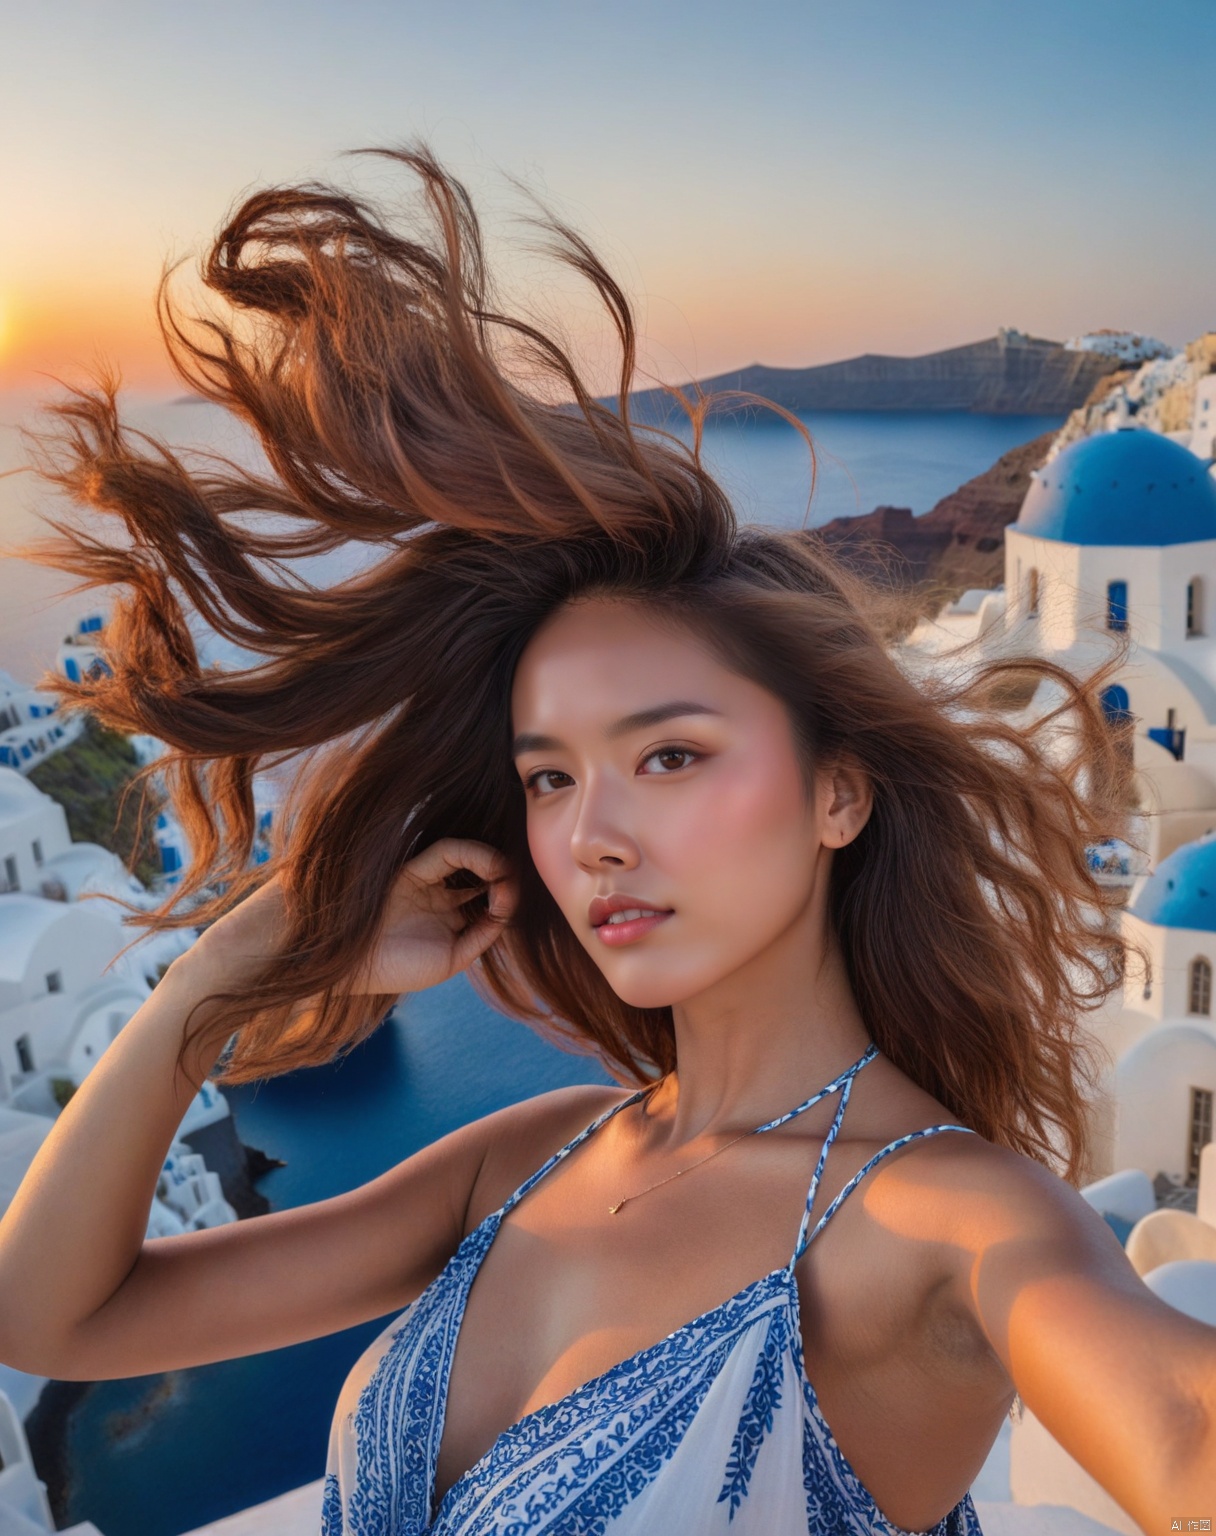  xxmix_girl,a woman takes a selfie Santorini at sunset, in Sundress, the wind blowing through her messy hair. The scene stretches out behind her, creating a stunning aesthetic and atmosphere with a rating of 1.2.,xxmix girl woman